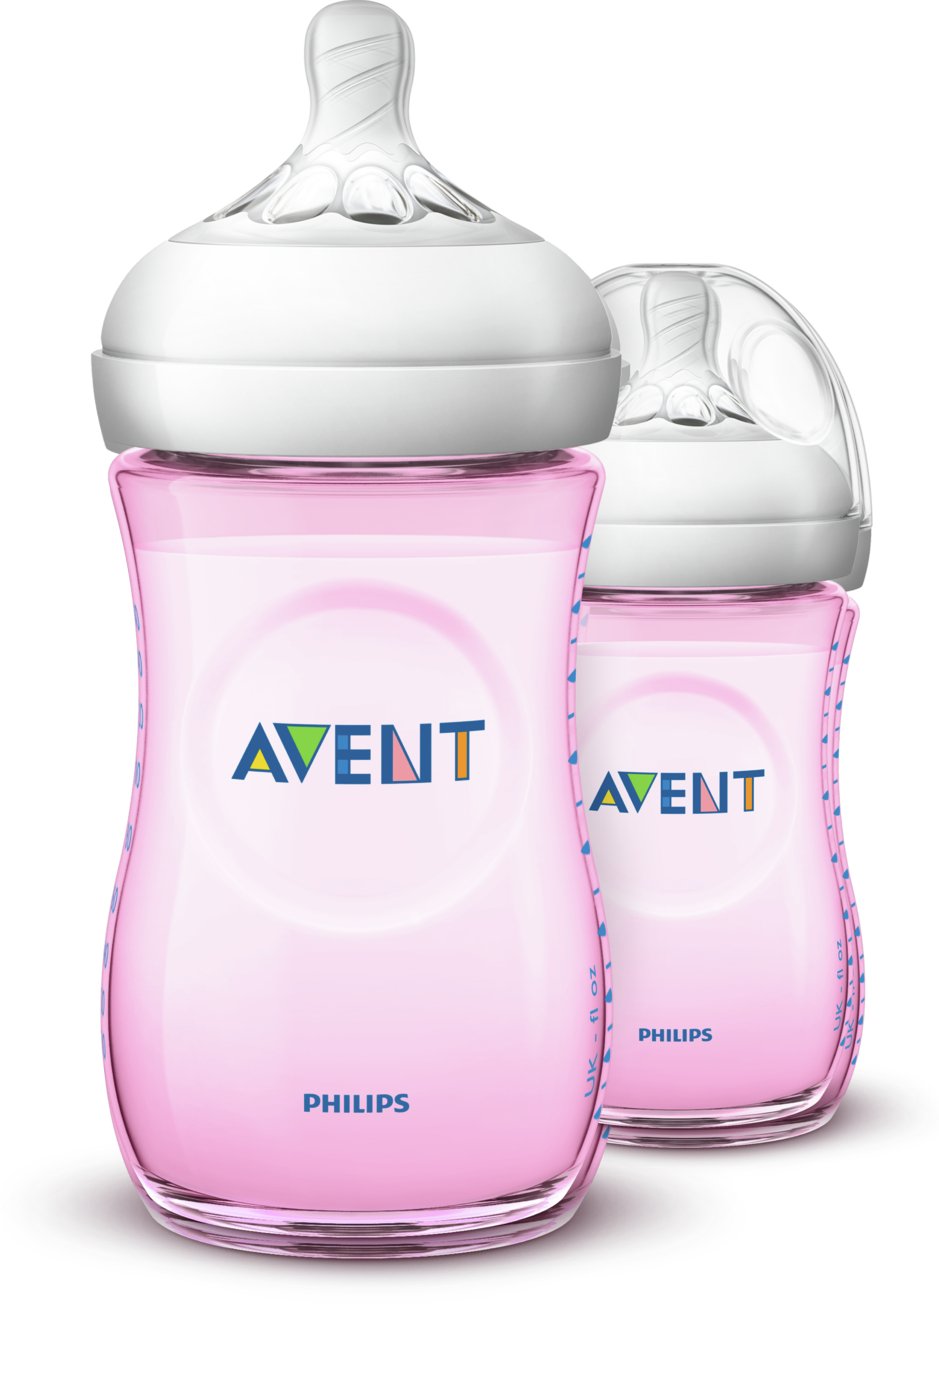 Philips Avent Natural Bottle 9oz 1month+ - 2 Pack